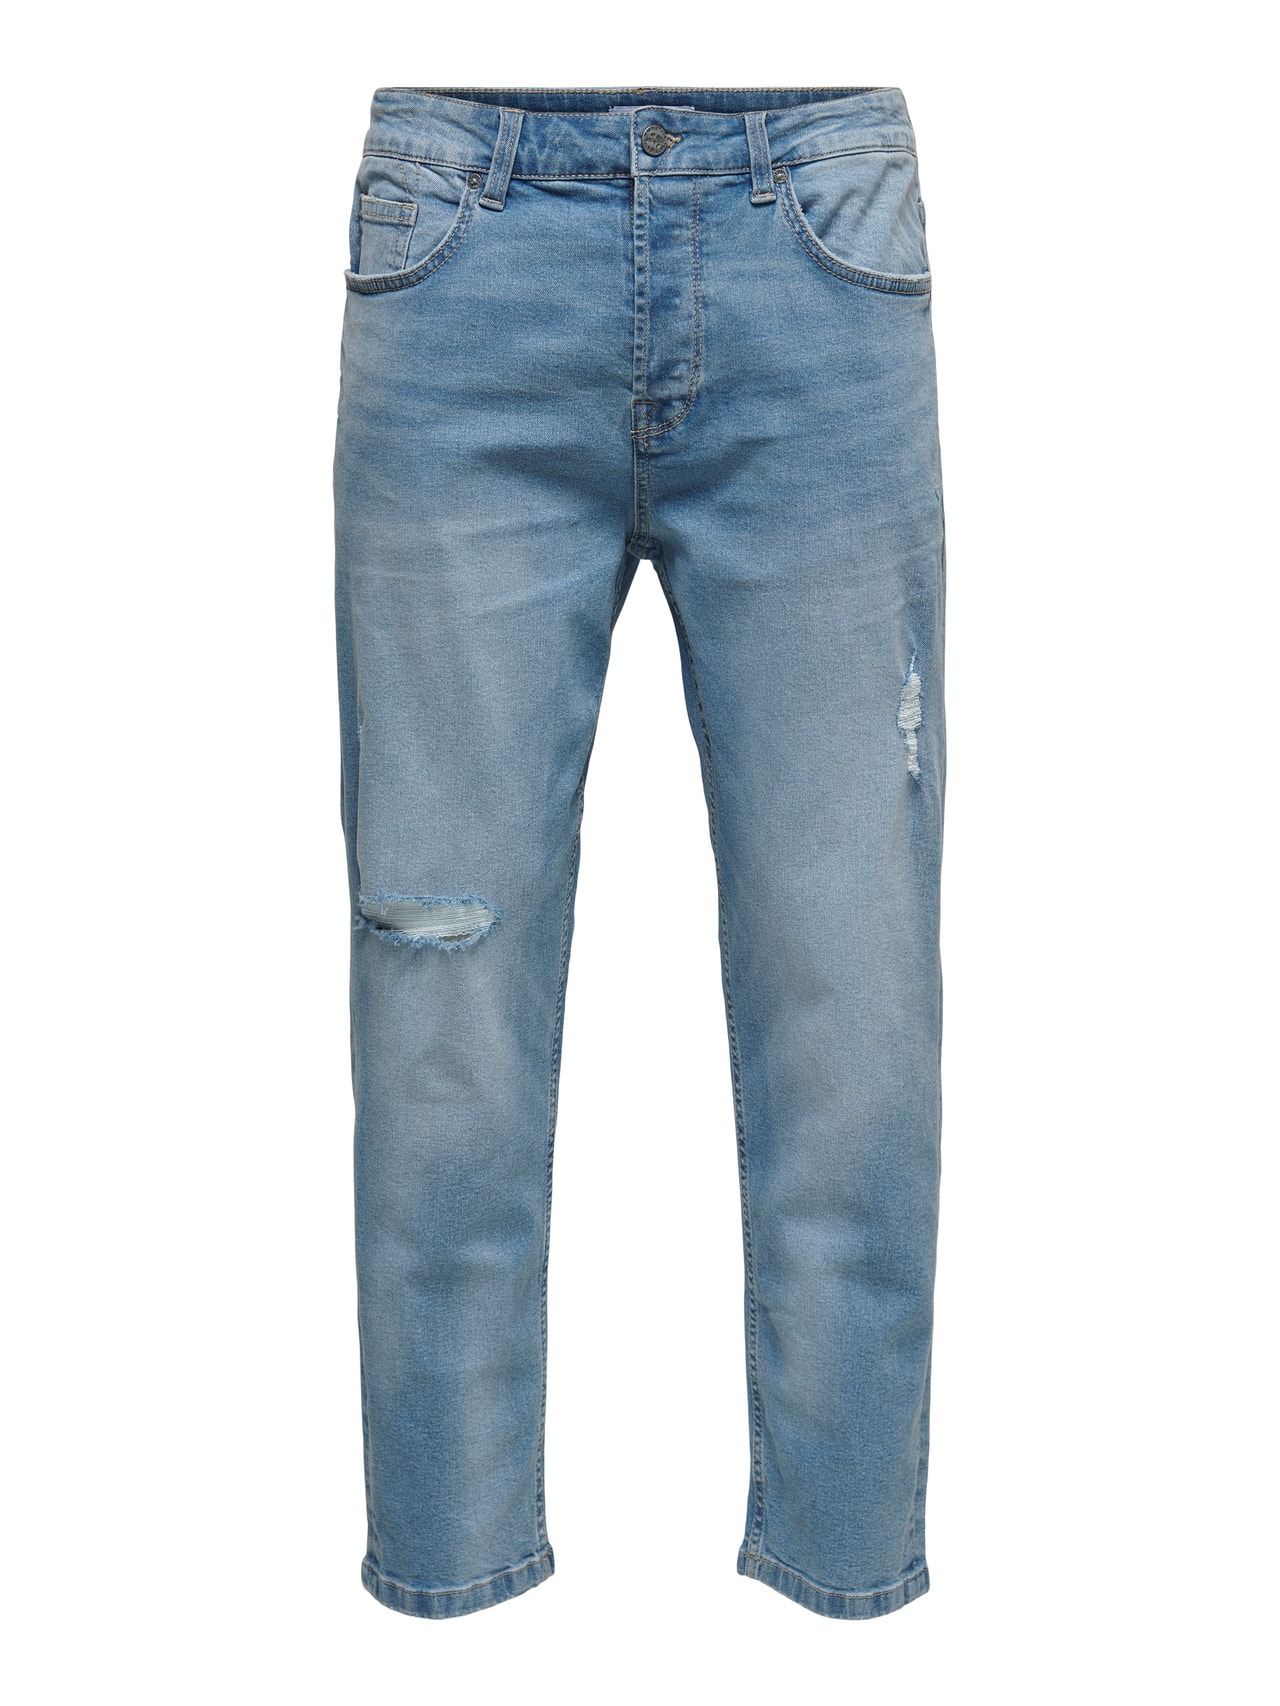 ONLY & SONS Tapered Fit Mid waist Destroyed hems Jeans -Blue Denim - 22020773